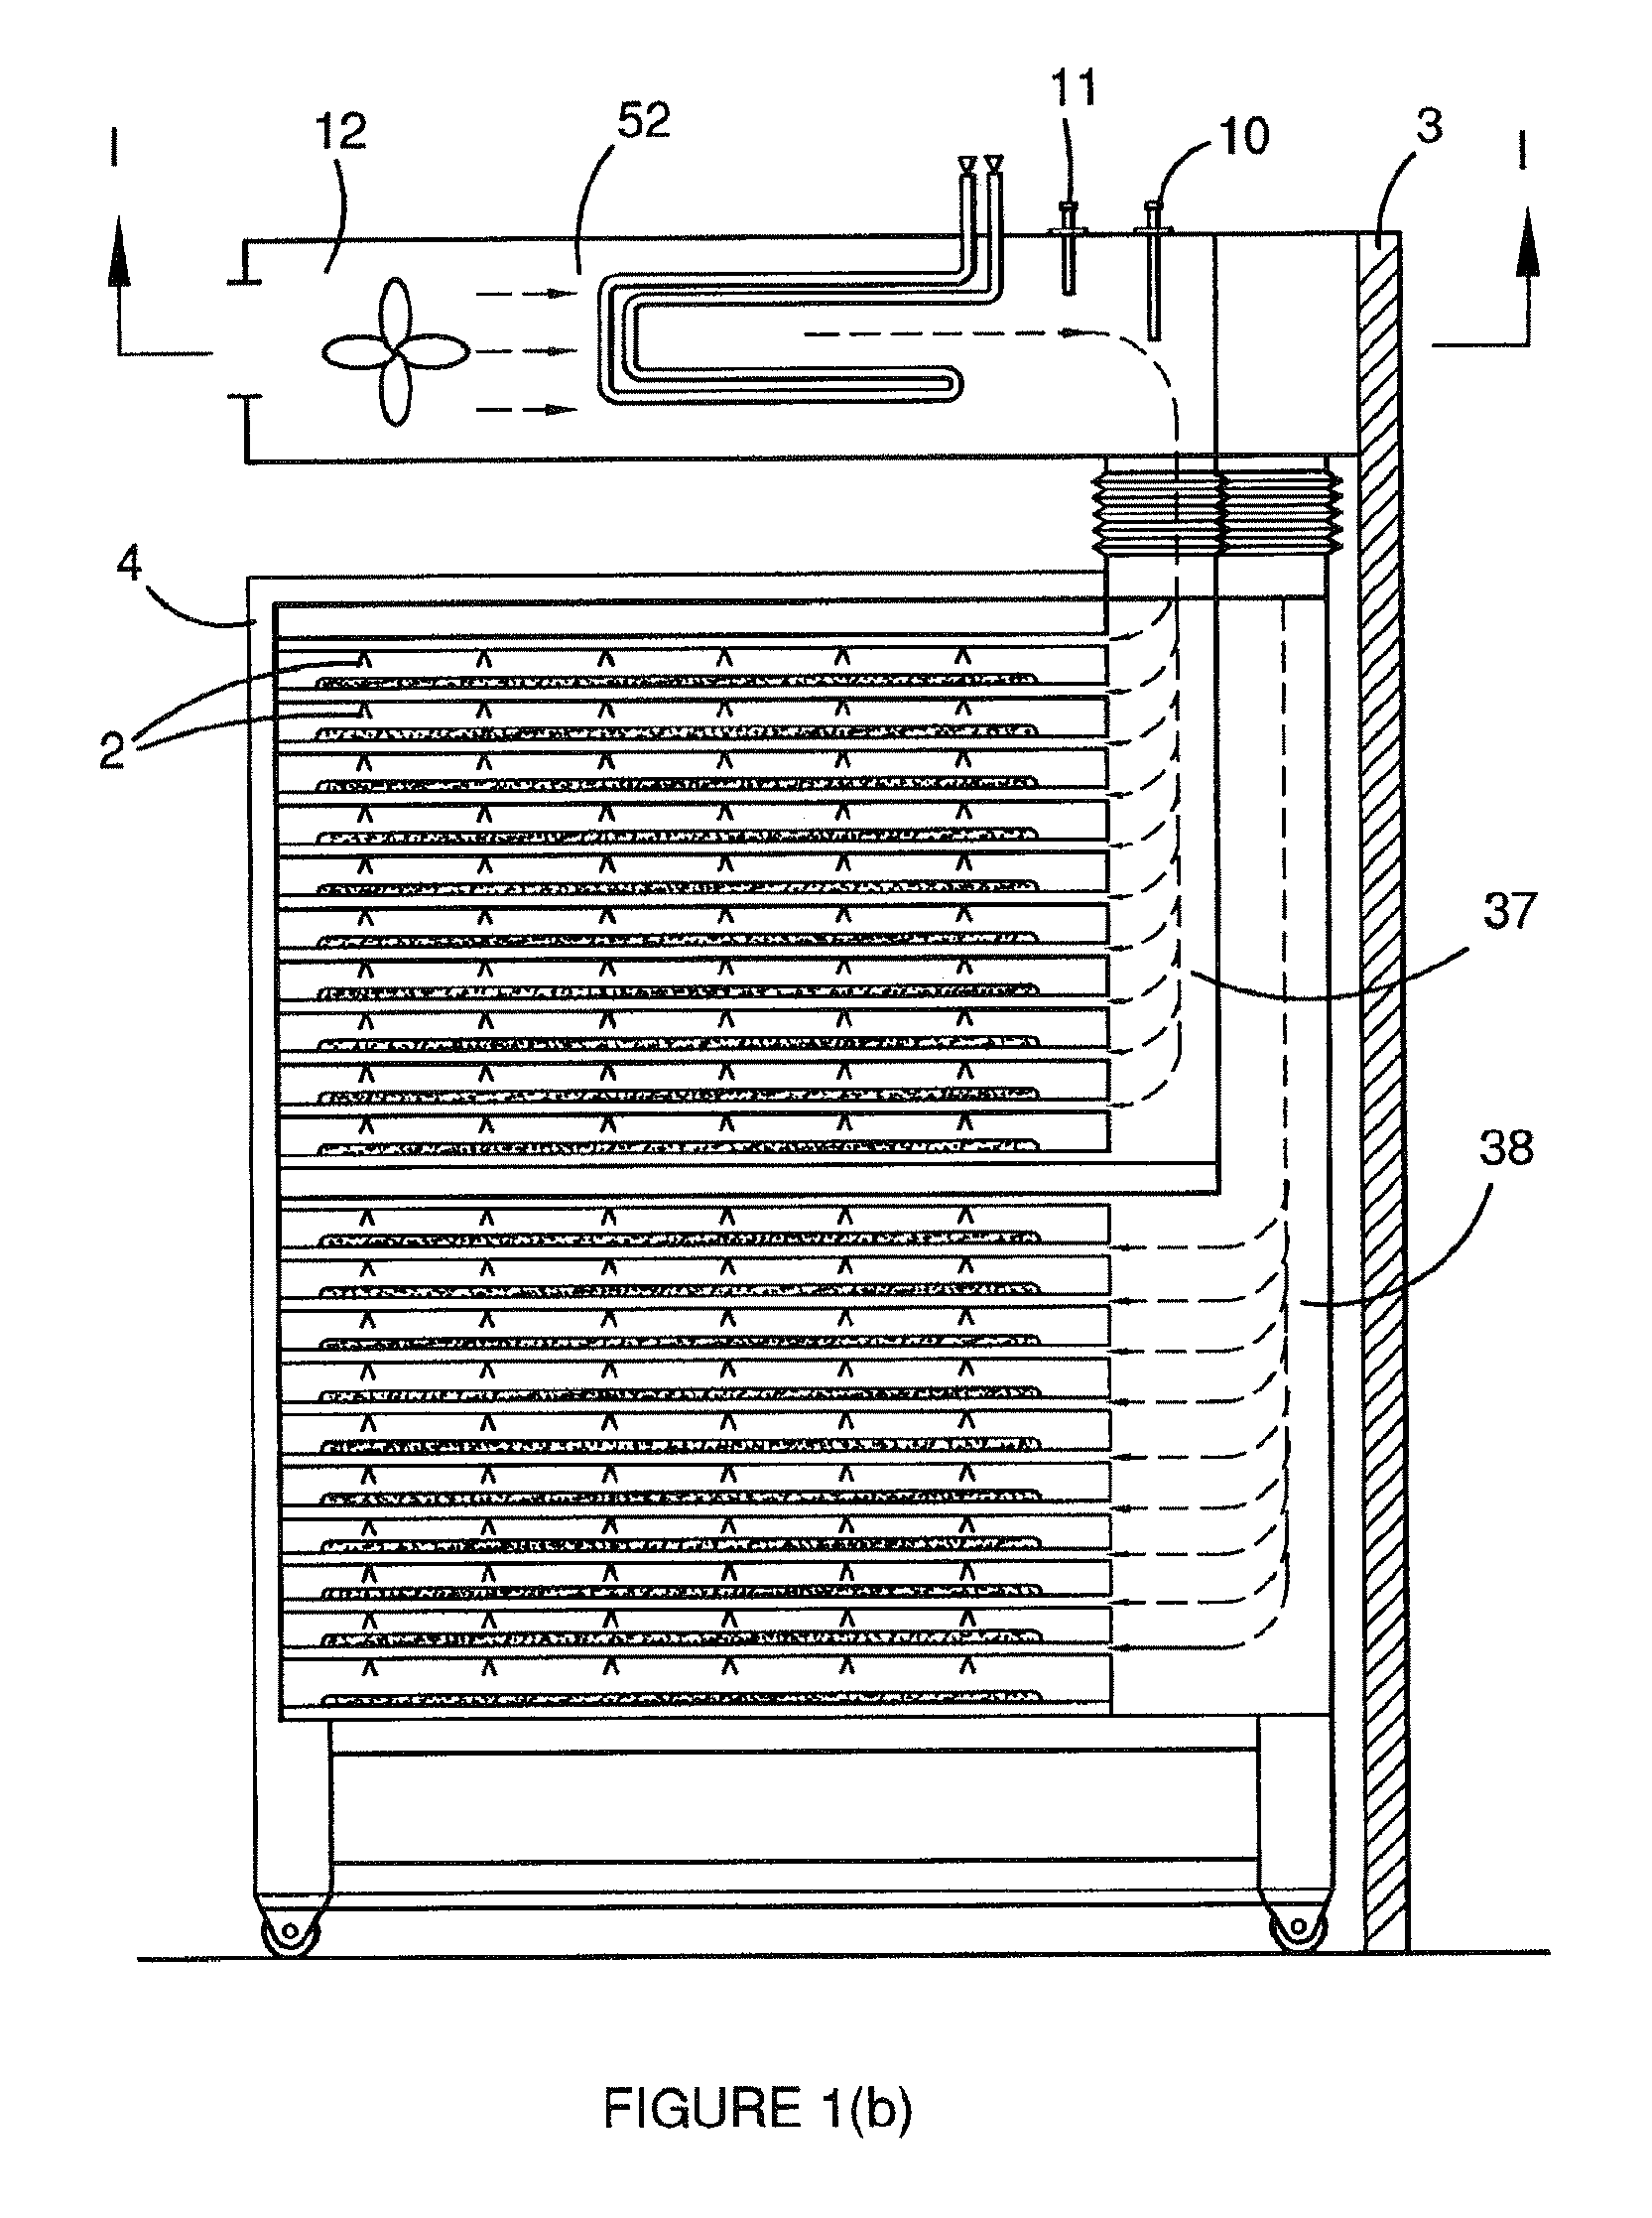 Dough conditioning apparatus and method